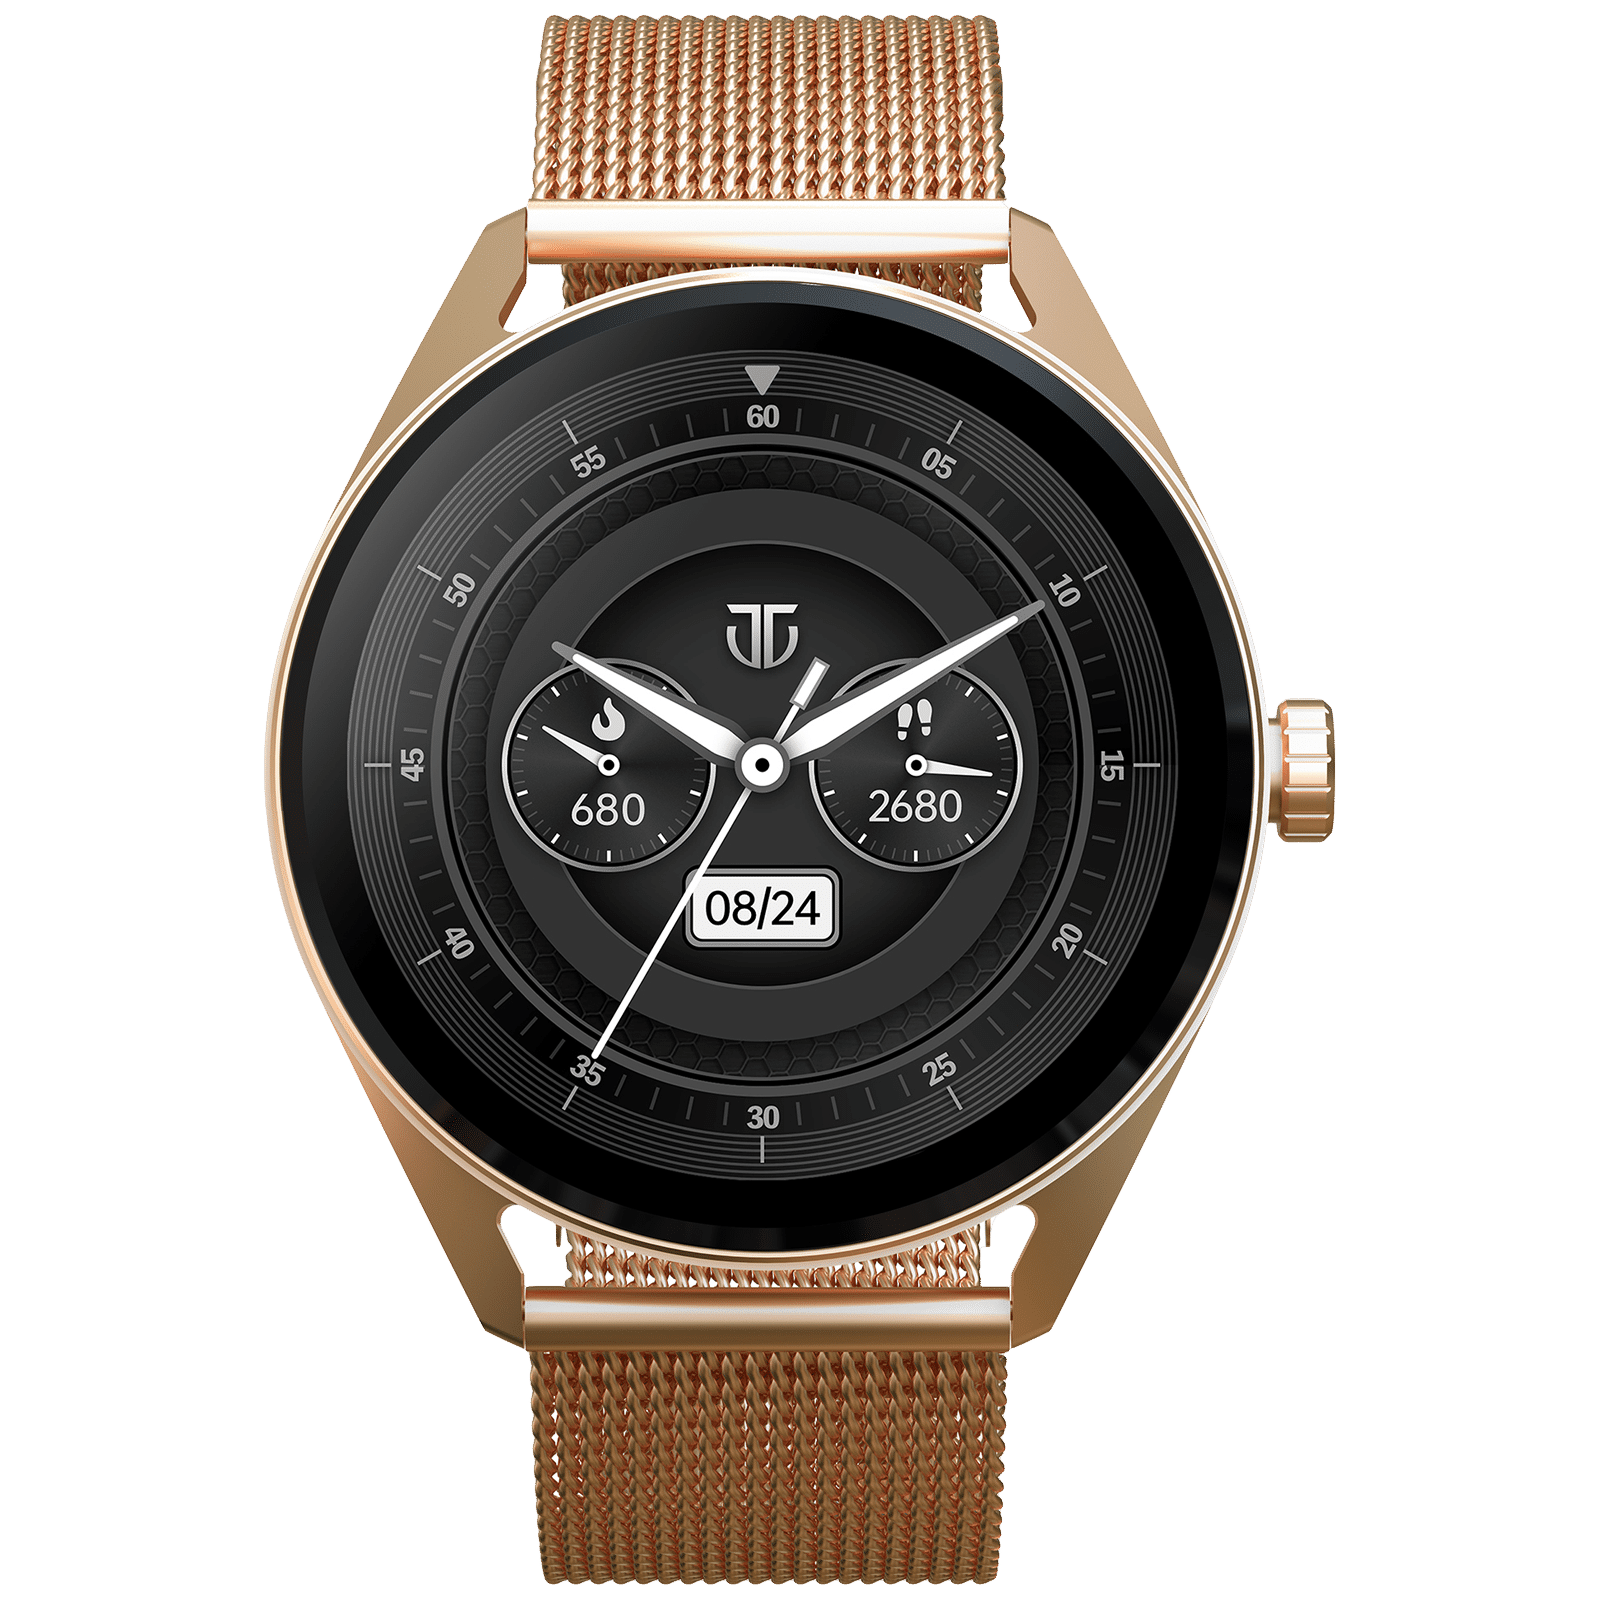 Ambrane Crest Pro smartwatch priced at Rs. 2499 on launch today